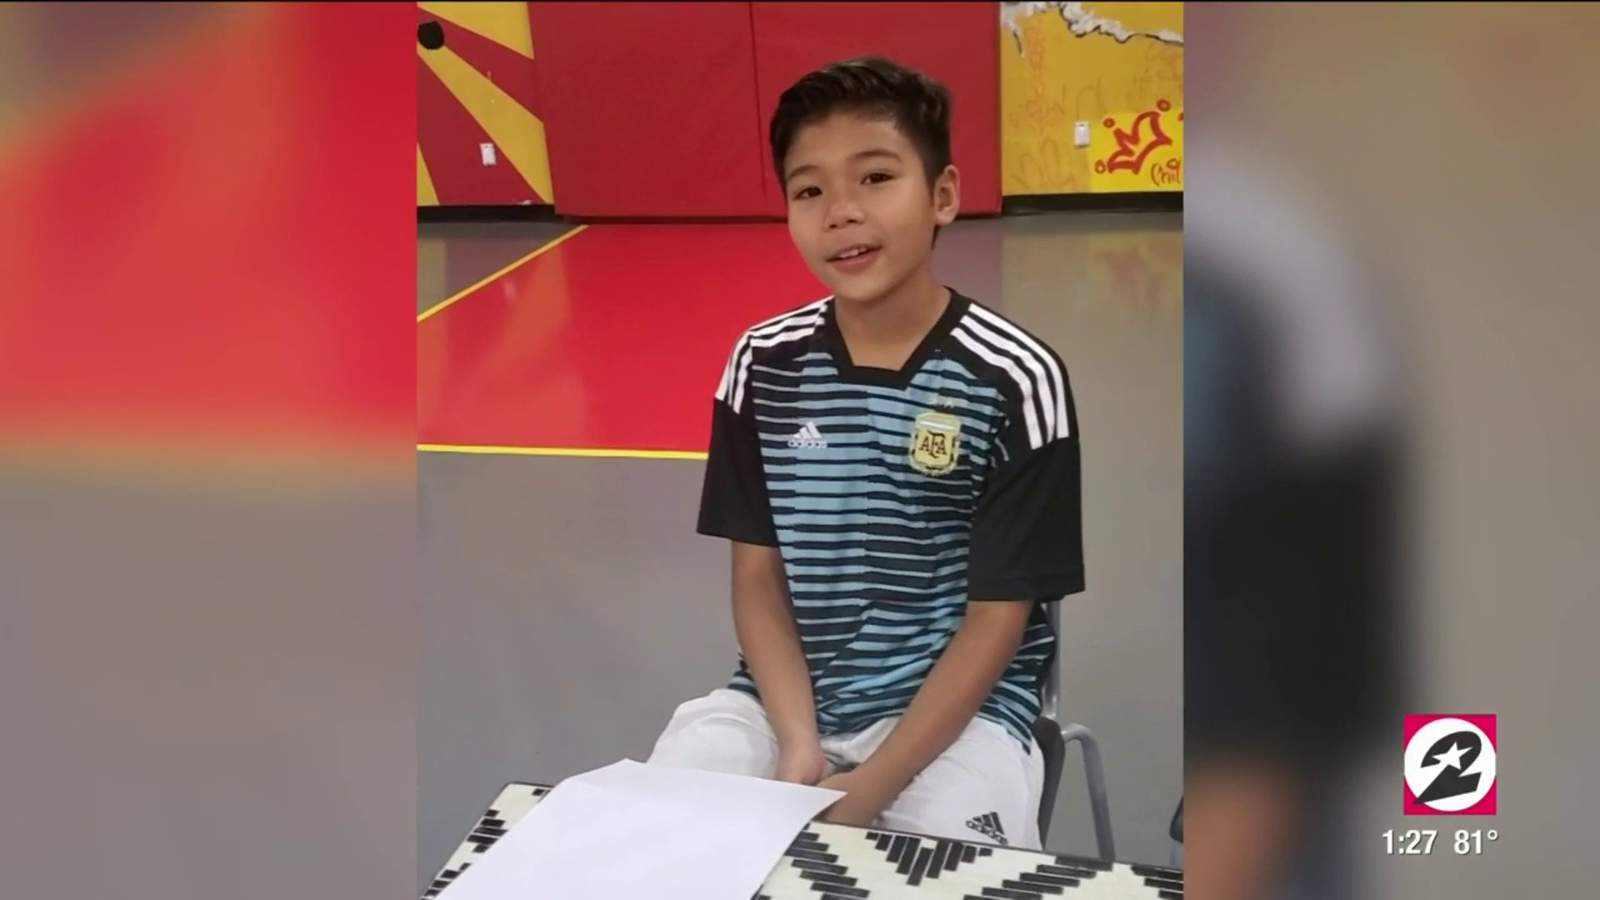 Quarantine turned an 11-year old soccer player from Humble into a journalist